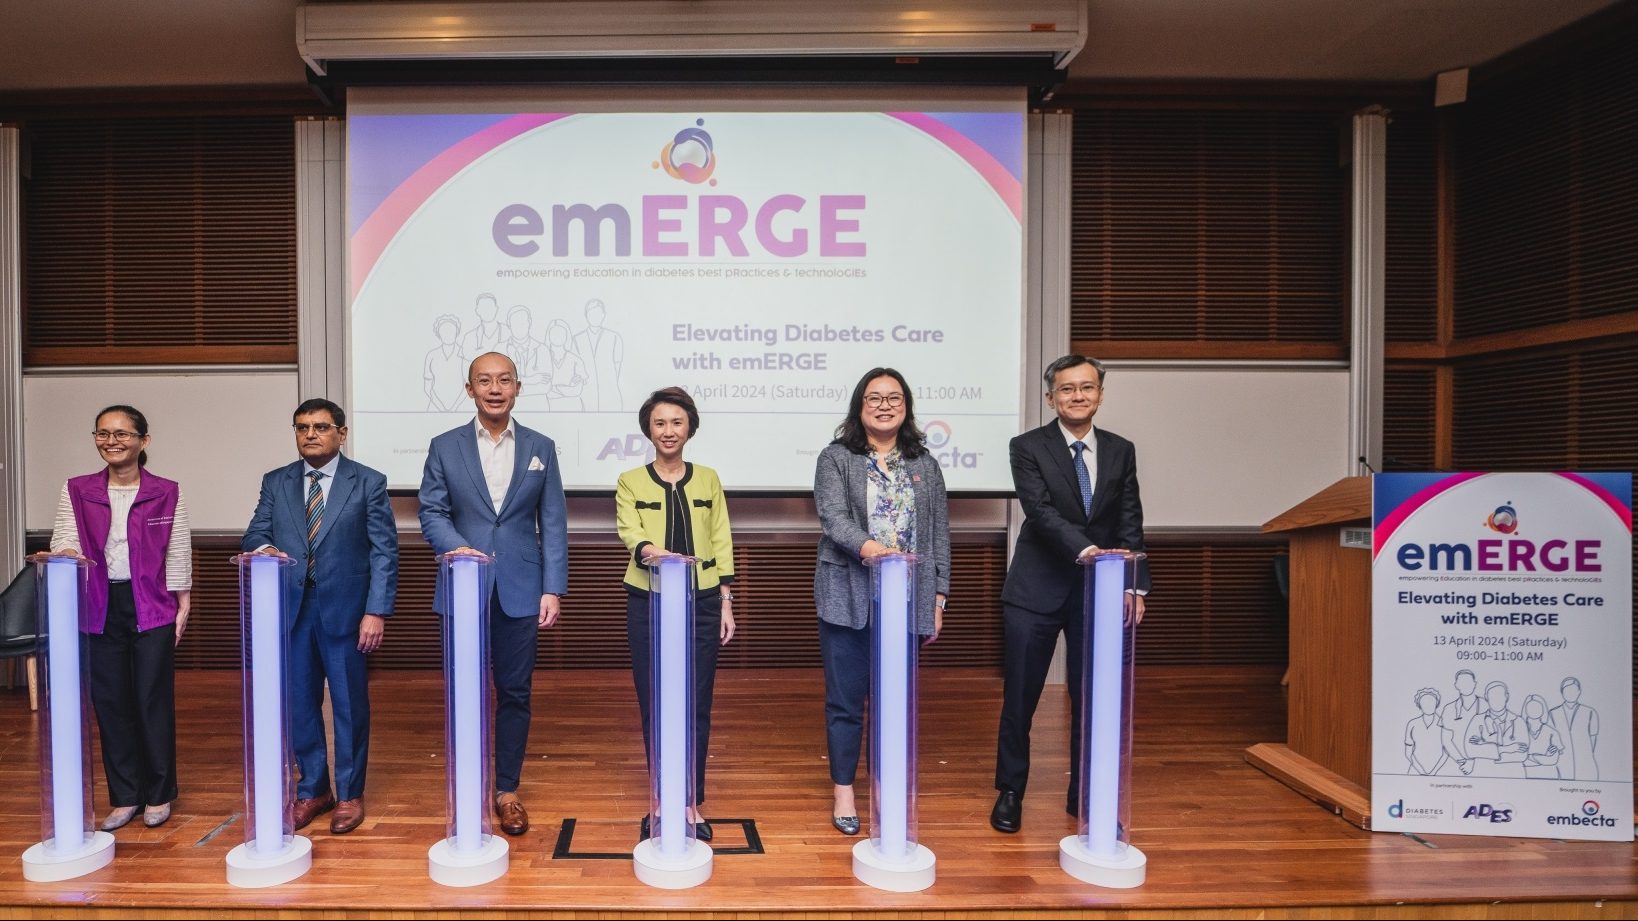 embecta launches educational programme to combat diabetes in Asia